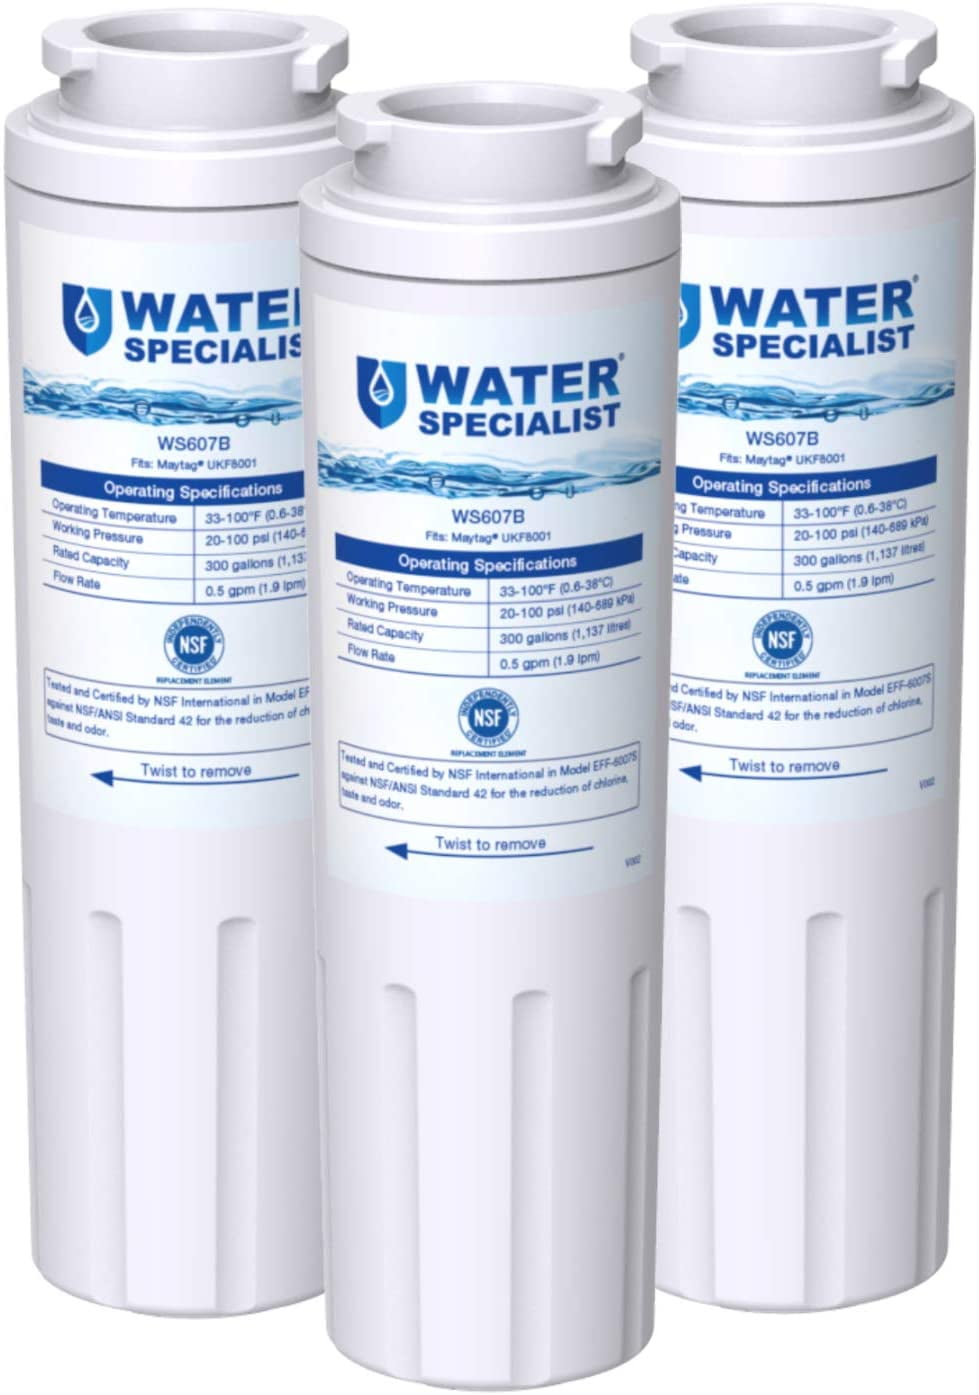 Refrigerator Water Filter 4 Replacement UKF8001,EDR4RXD1,Whirlpool 469006-3 pack 